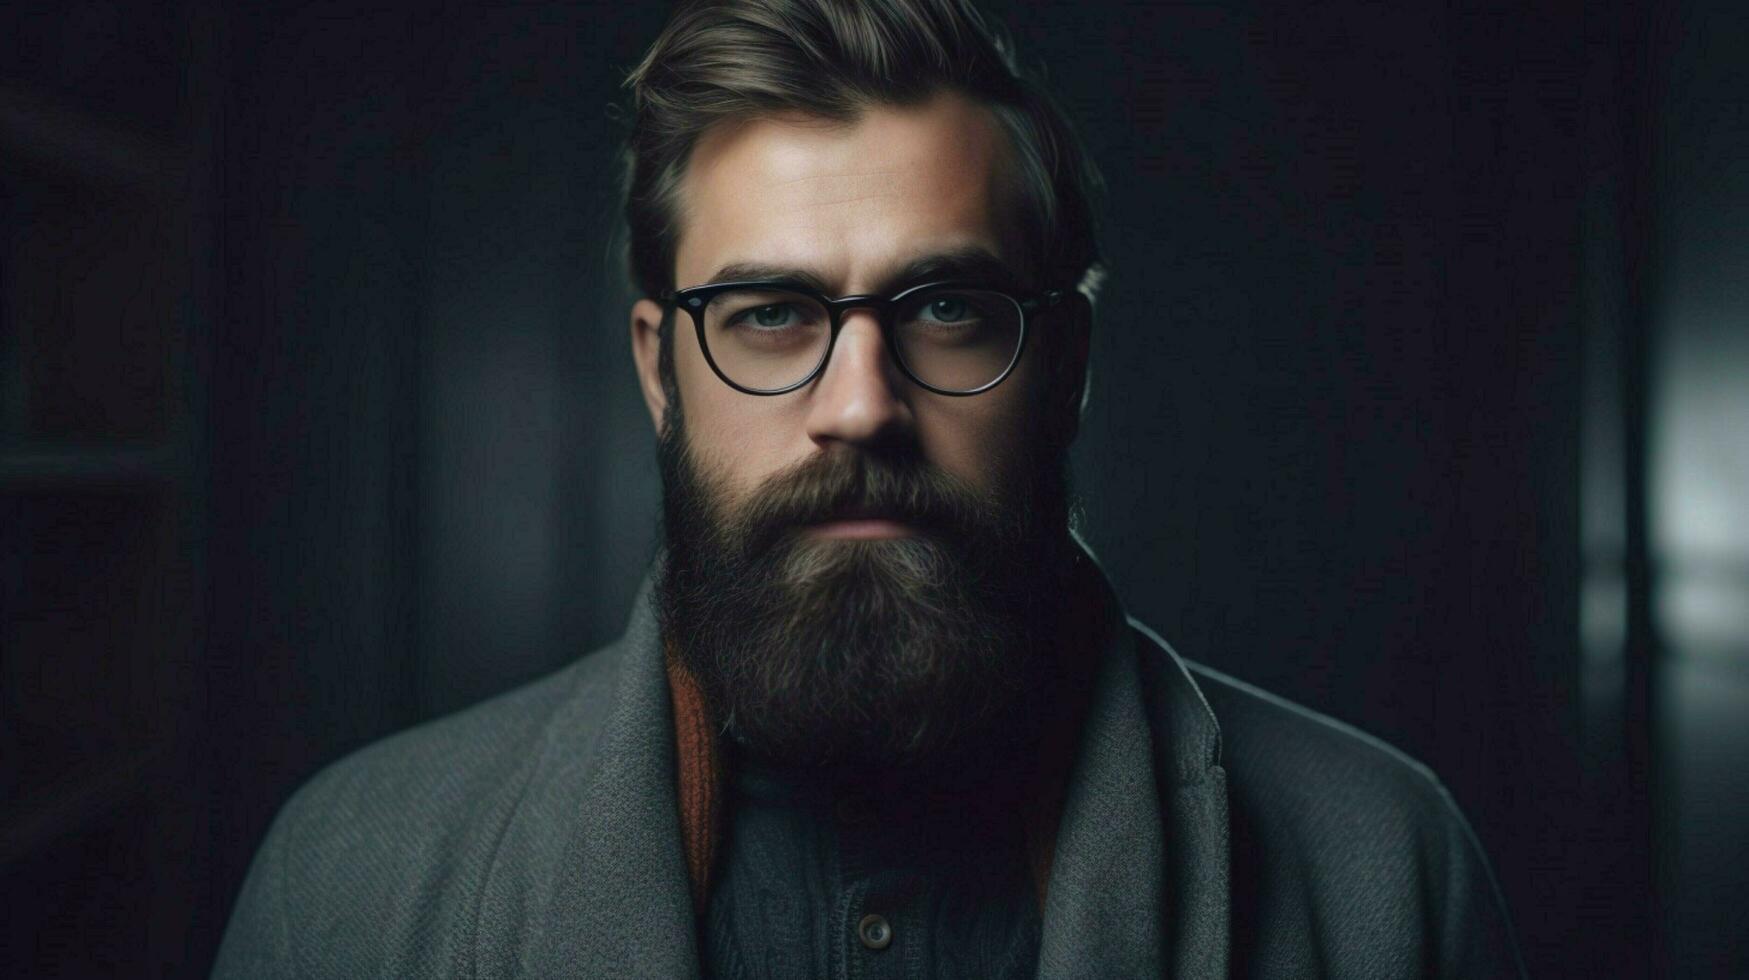 a man with a beard and glasses looks at the camera photo